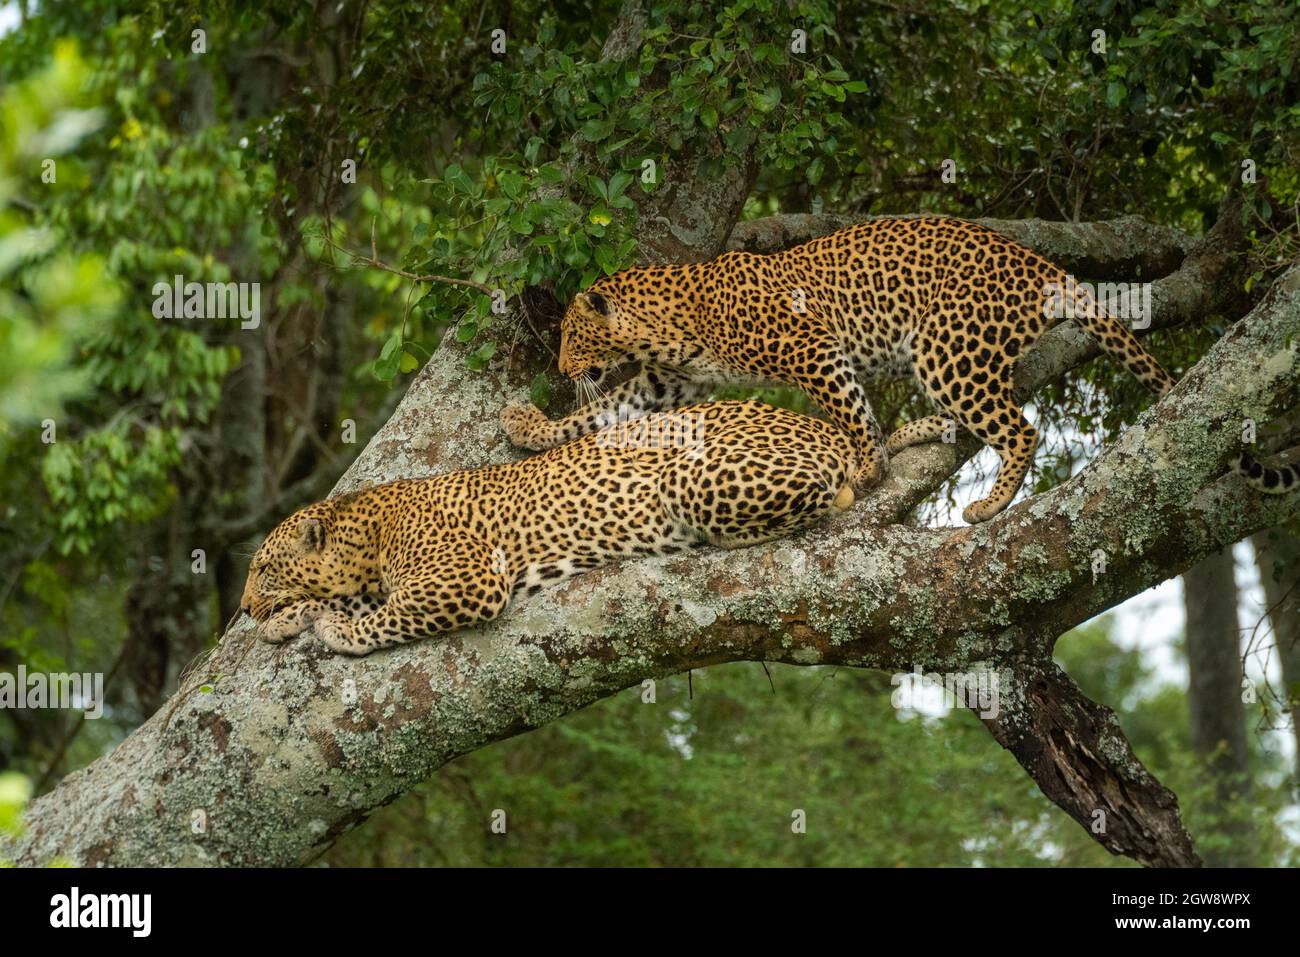 Leopard Climbs Past Another Lying On Branch Stock Photo